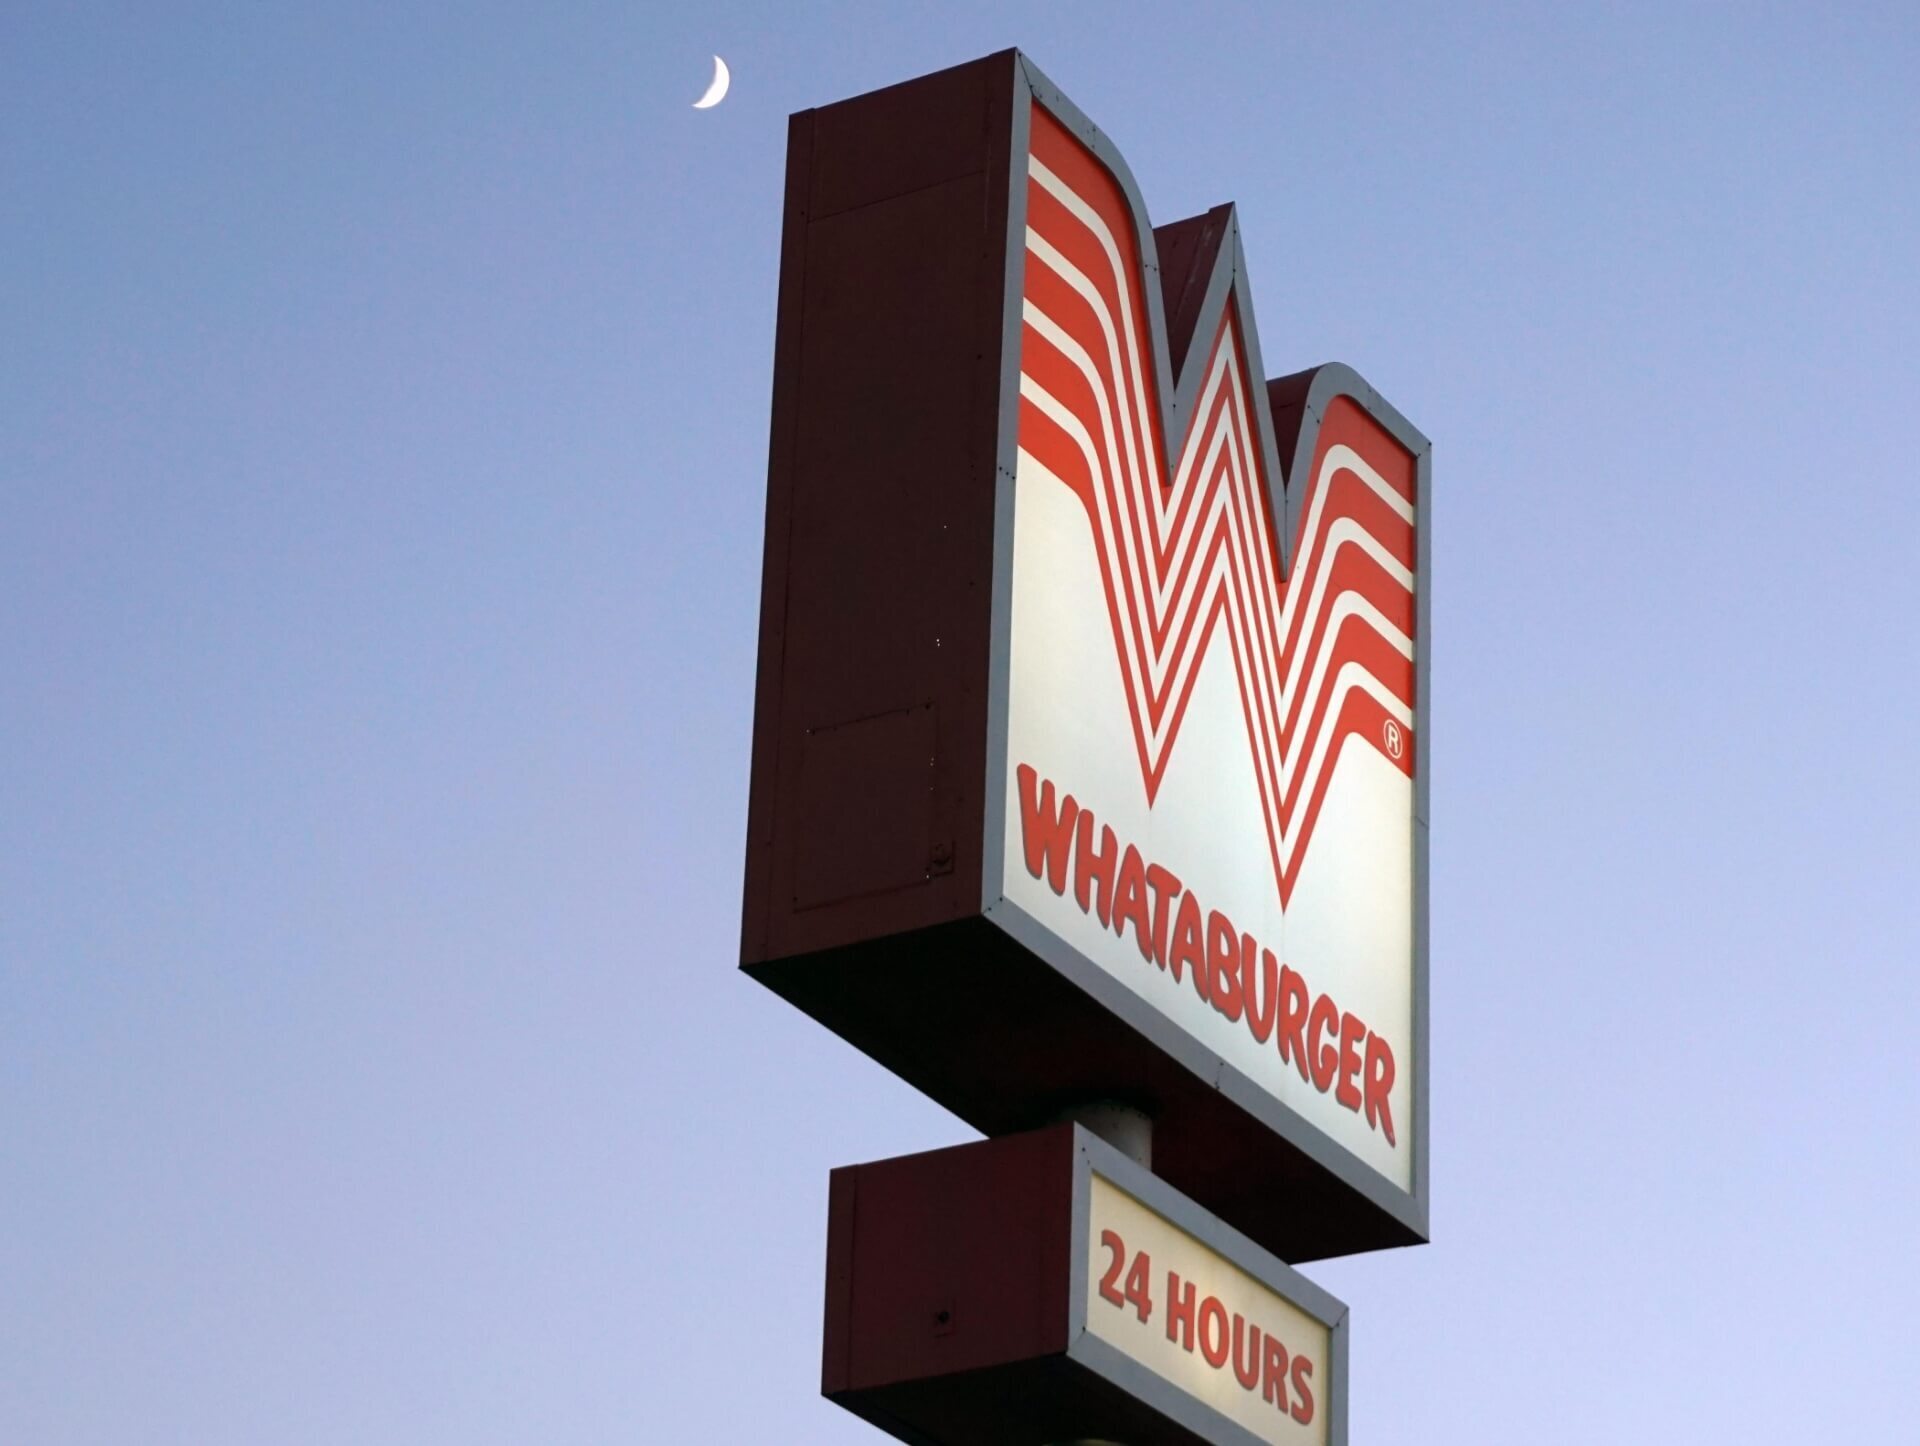 Innovative Dining: Whataburger's Digital Kitchen in Texas